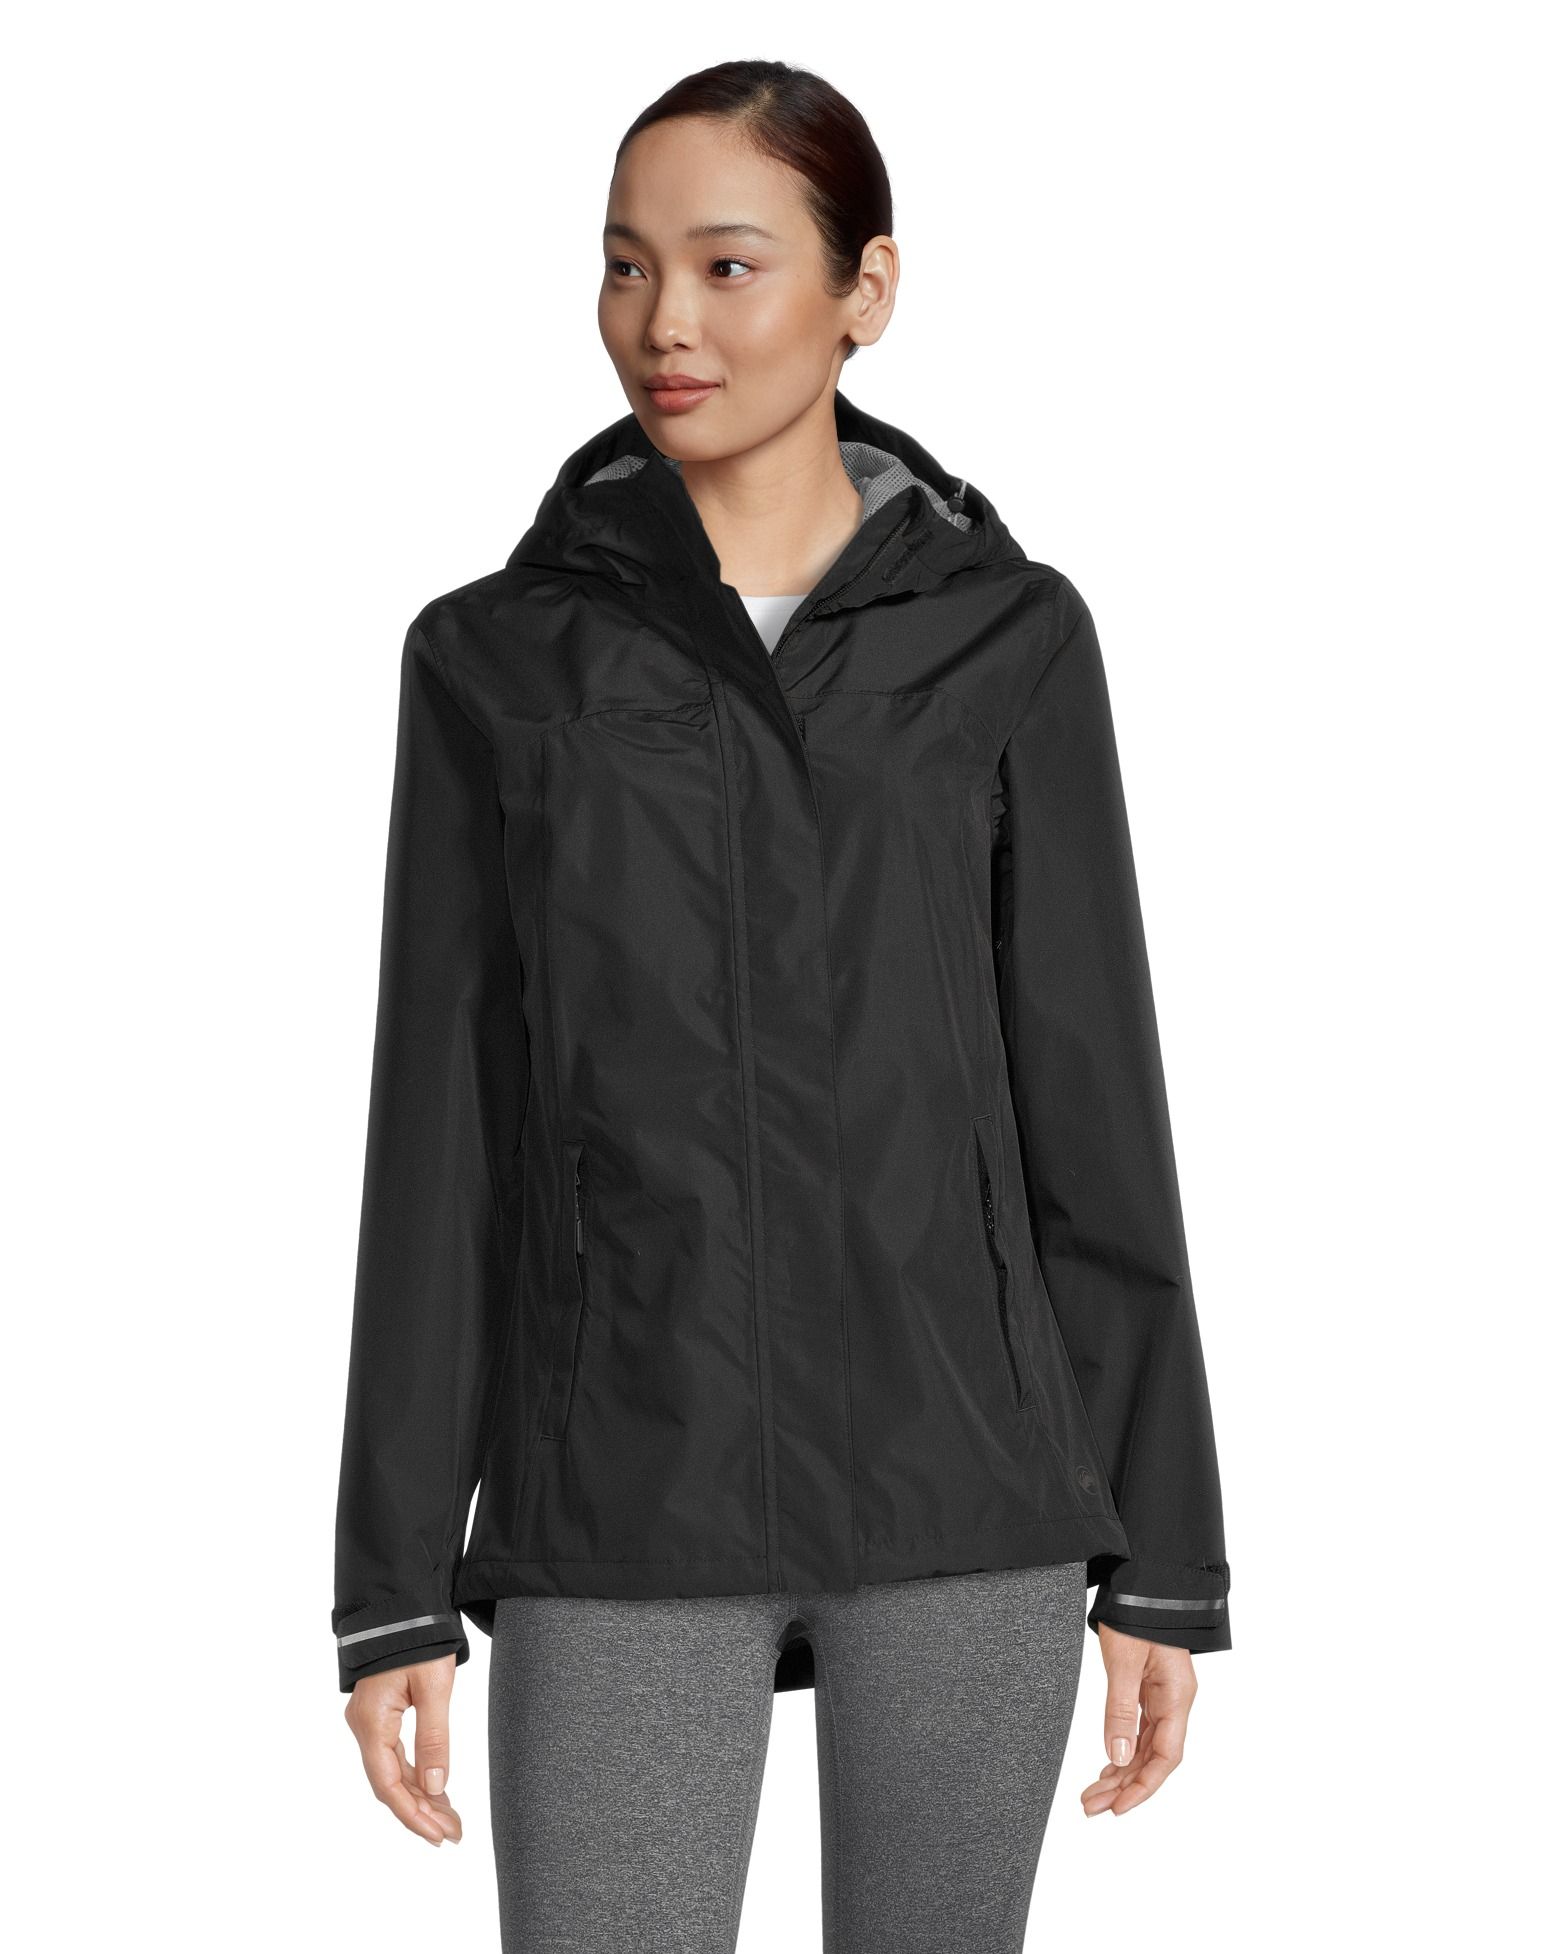 The 10 Best Women's Rain Jackets of 2023, Tested and Reviewed